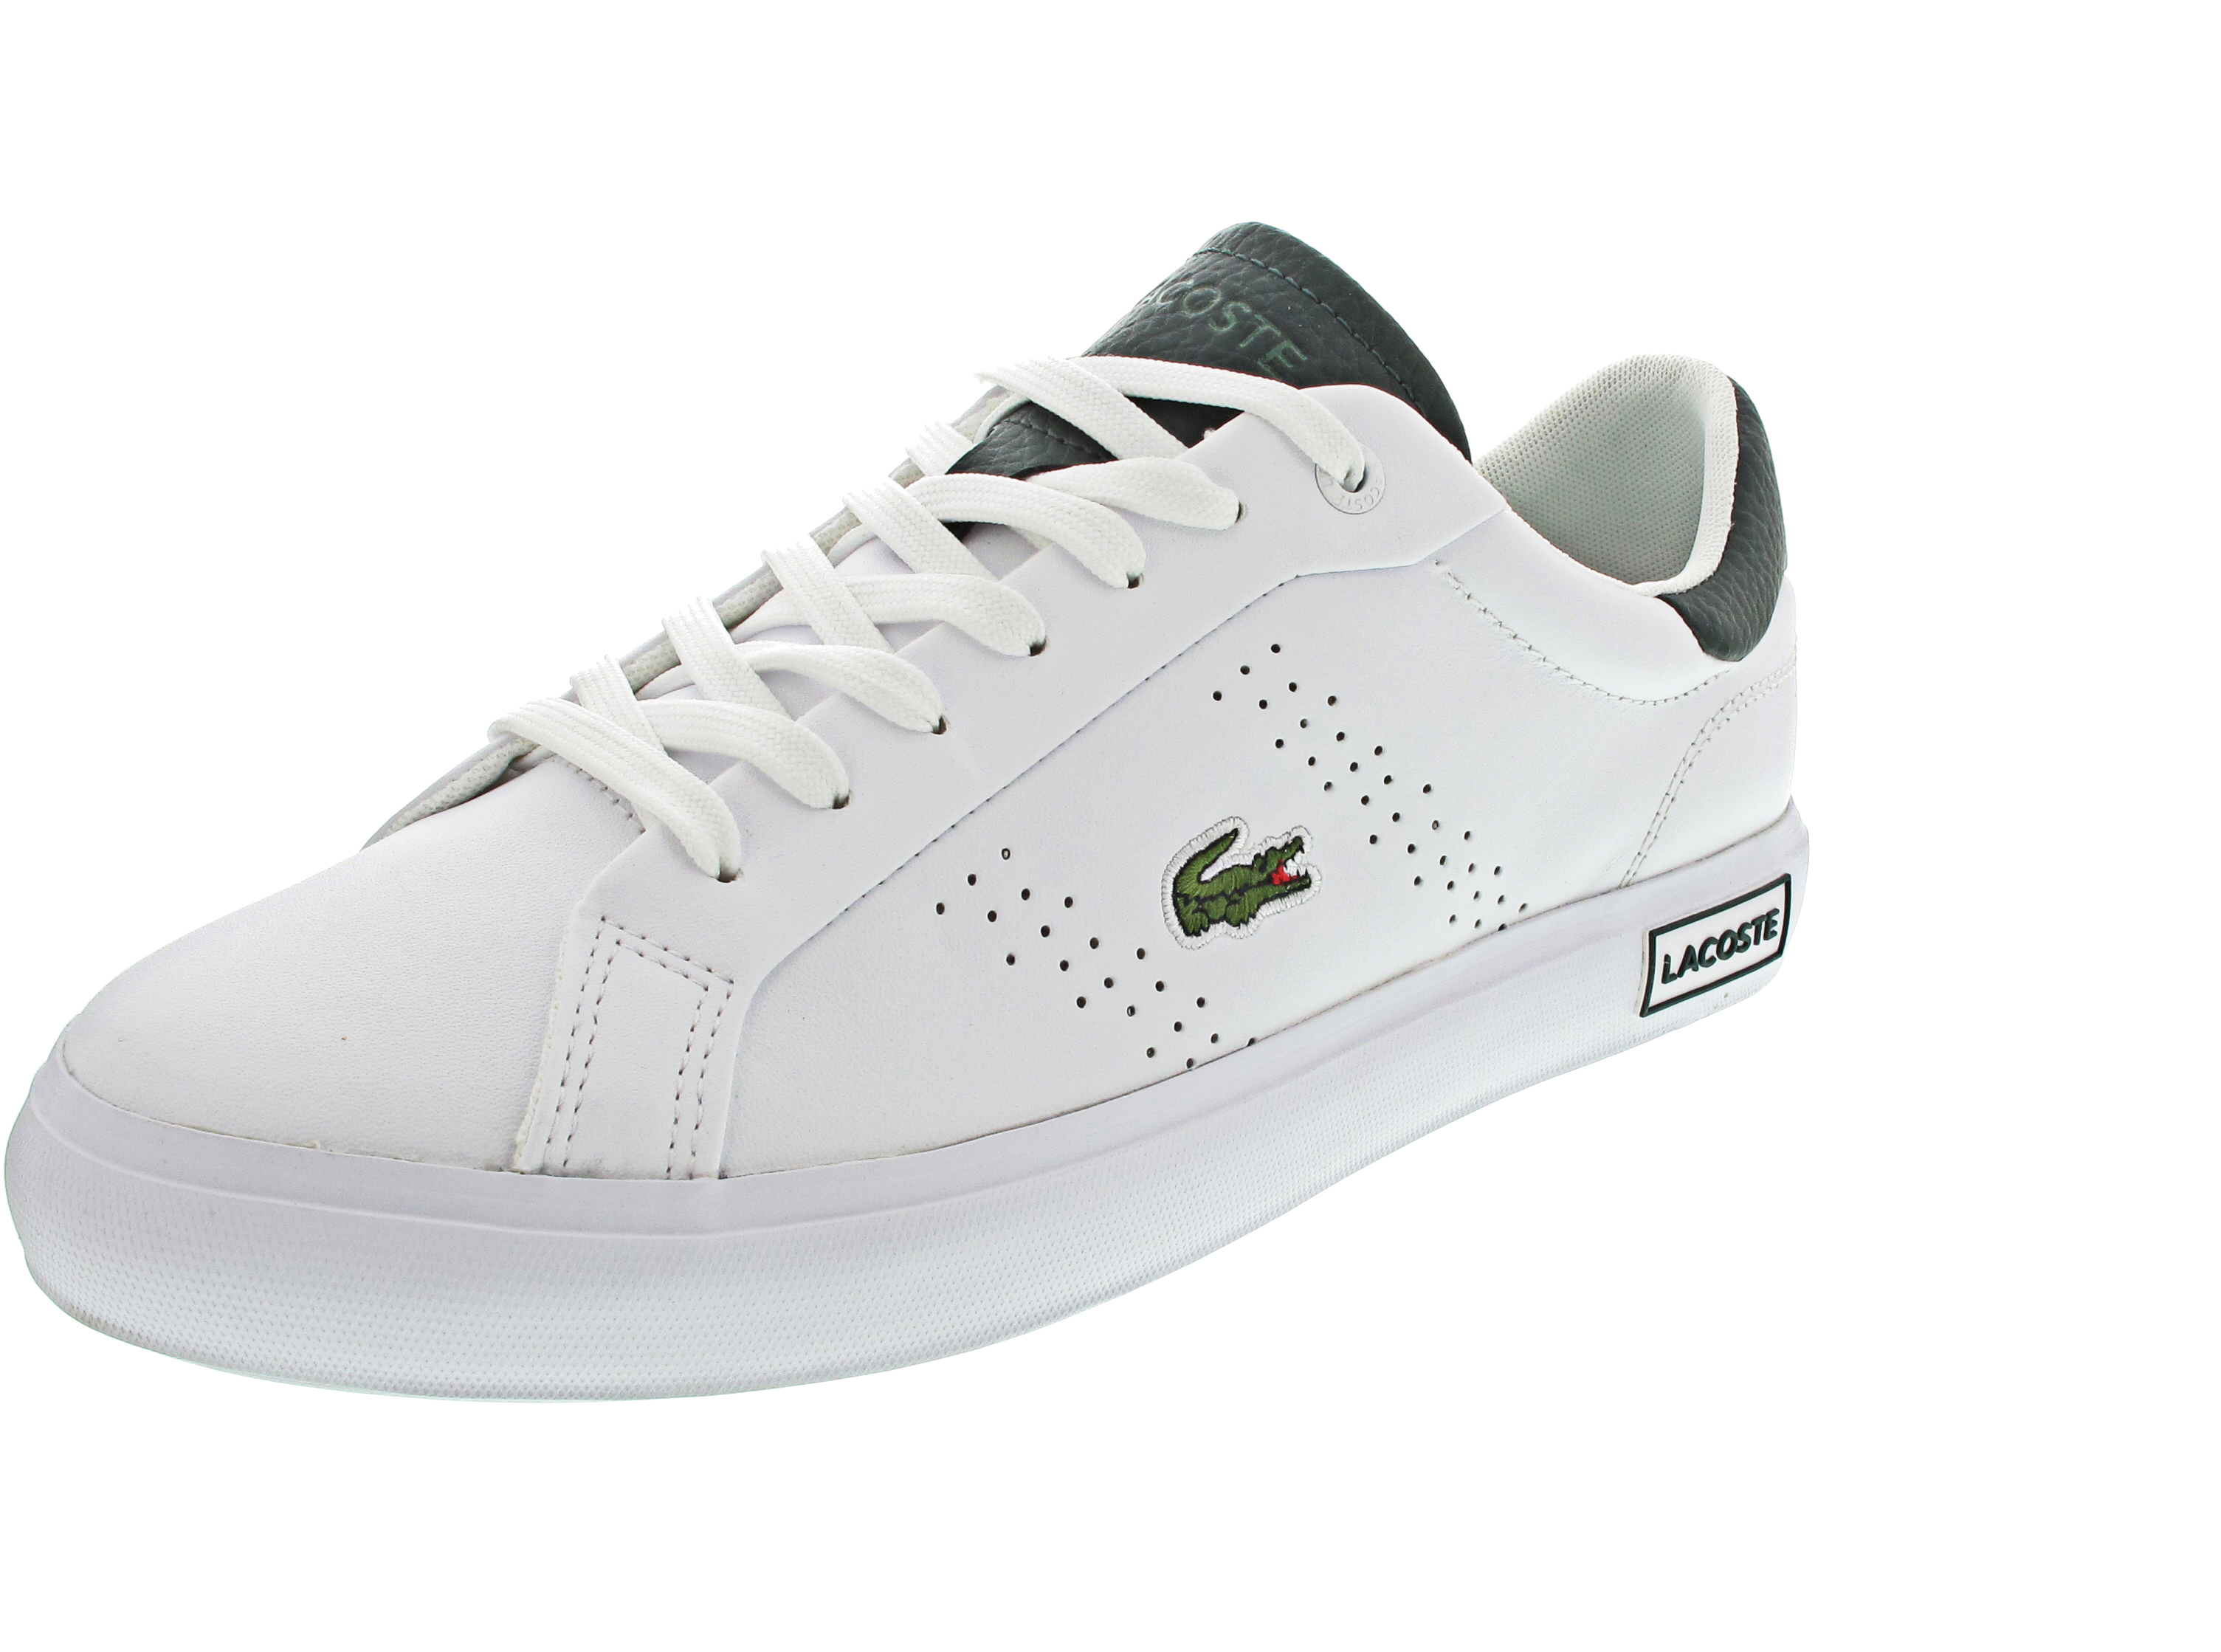 Lacoste Powercourt 2.0 Leather